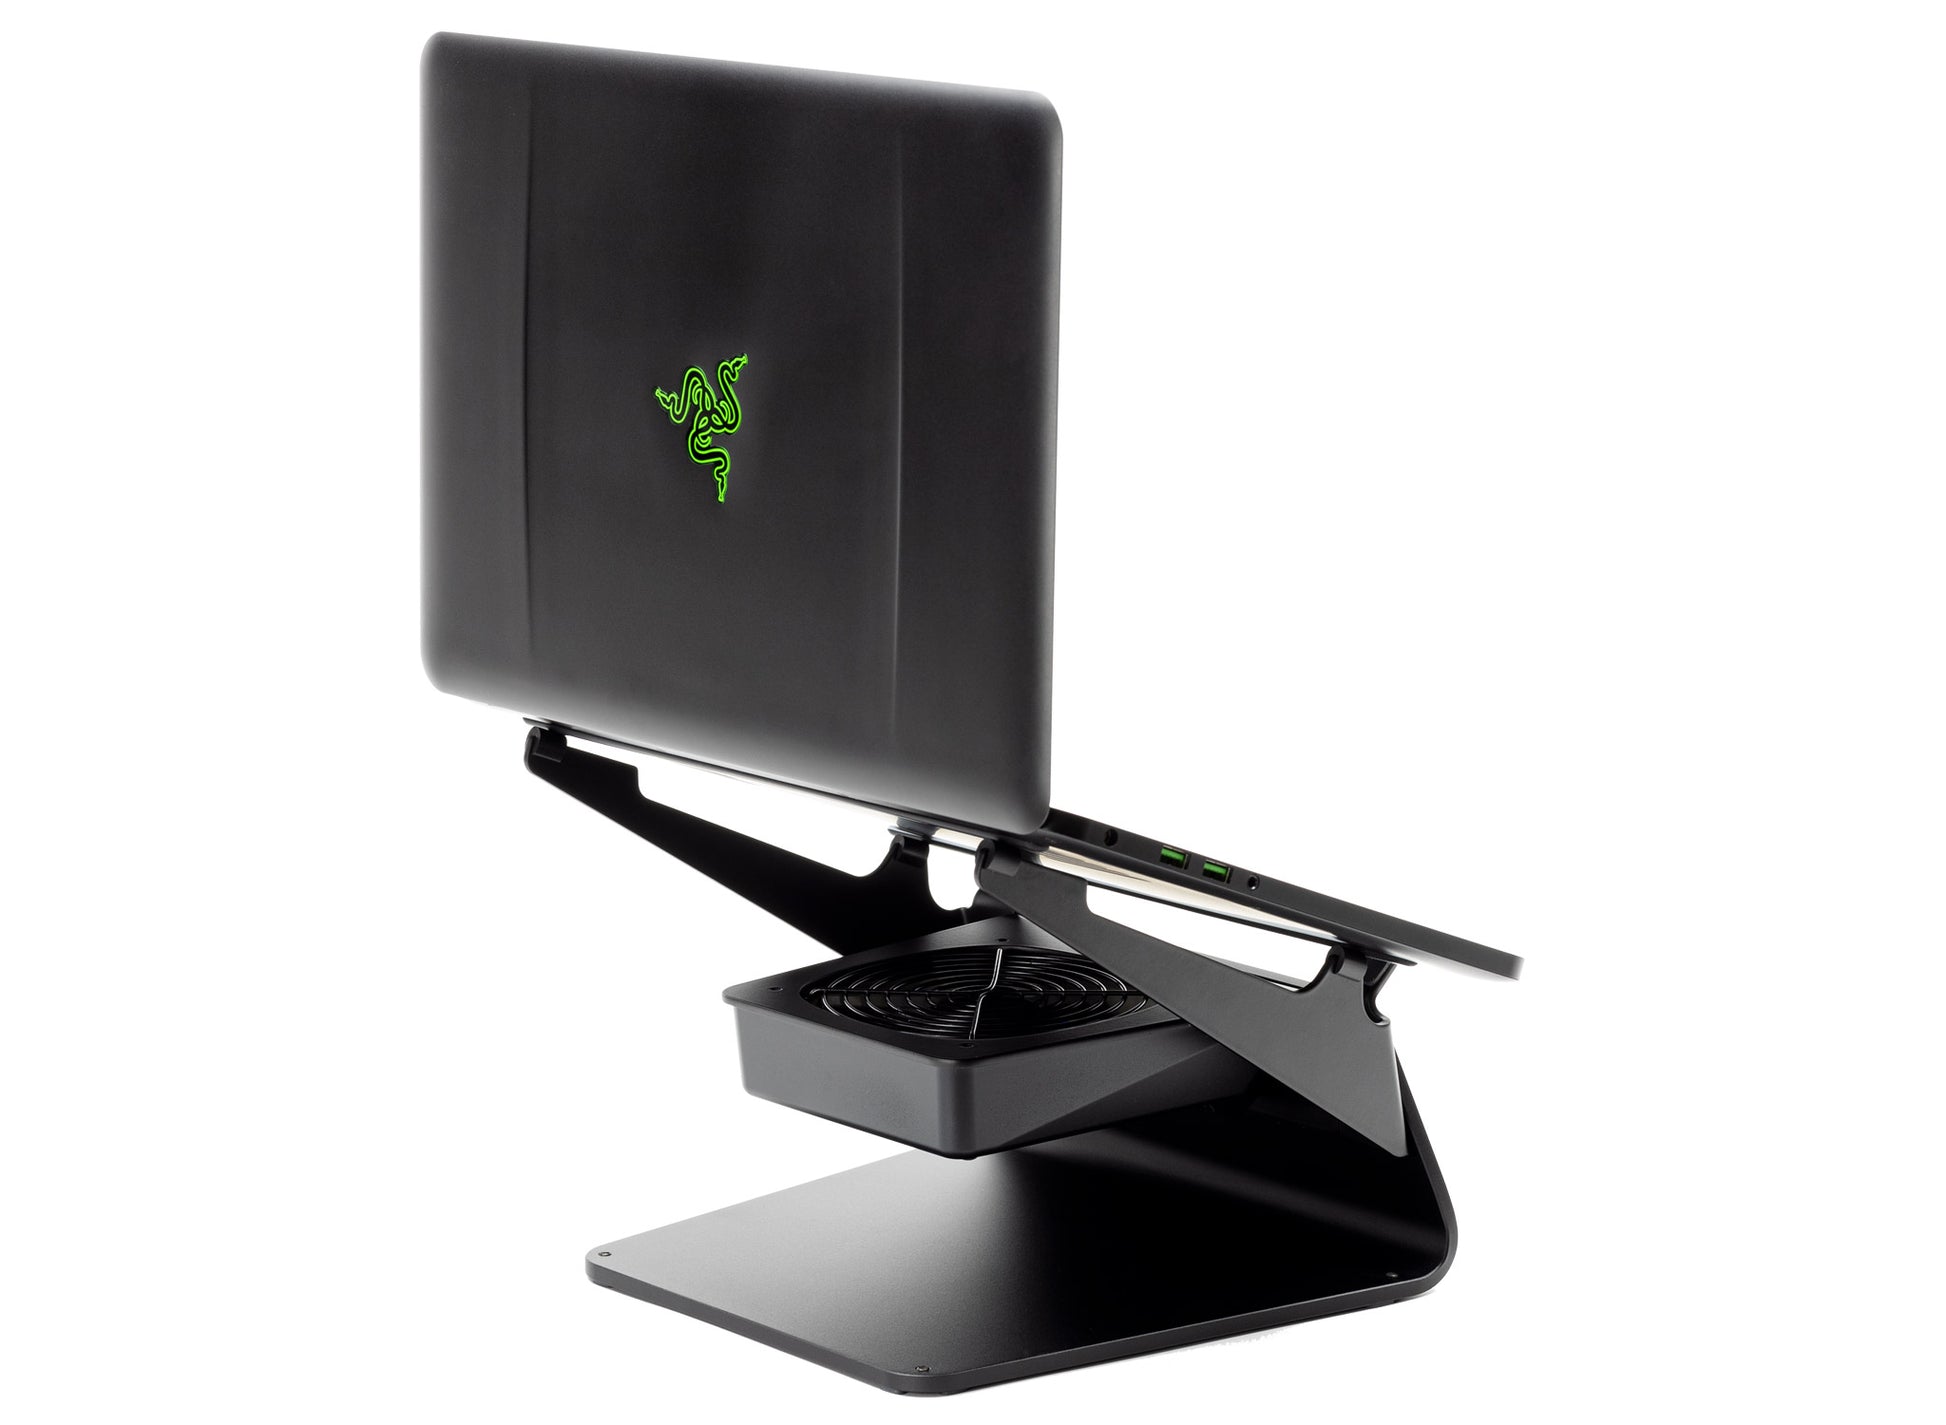 SVALT Cooling Stand model SxG17 black back side view for quiet fan cooling performance with PC gaming laptops